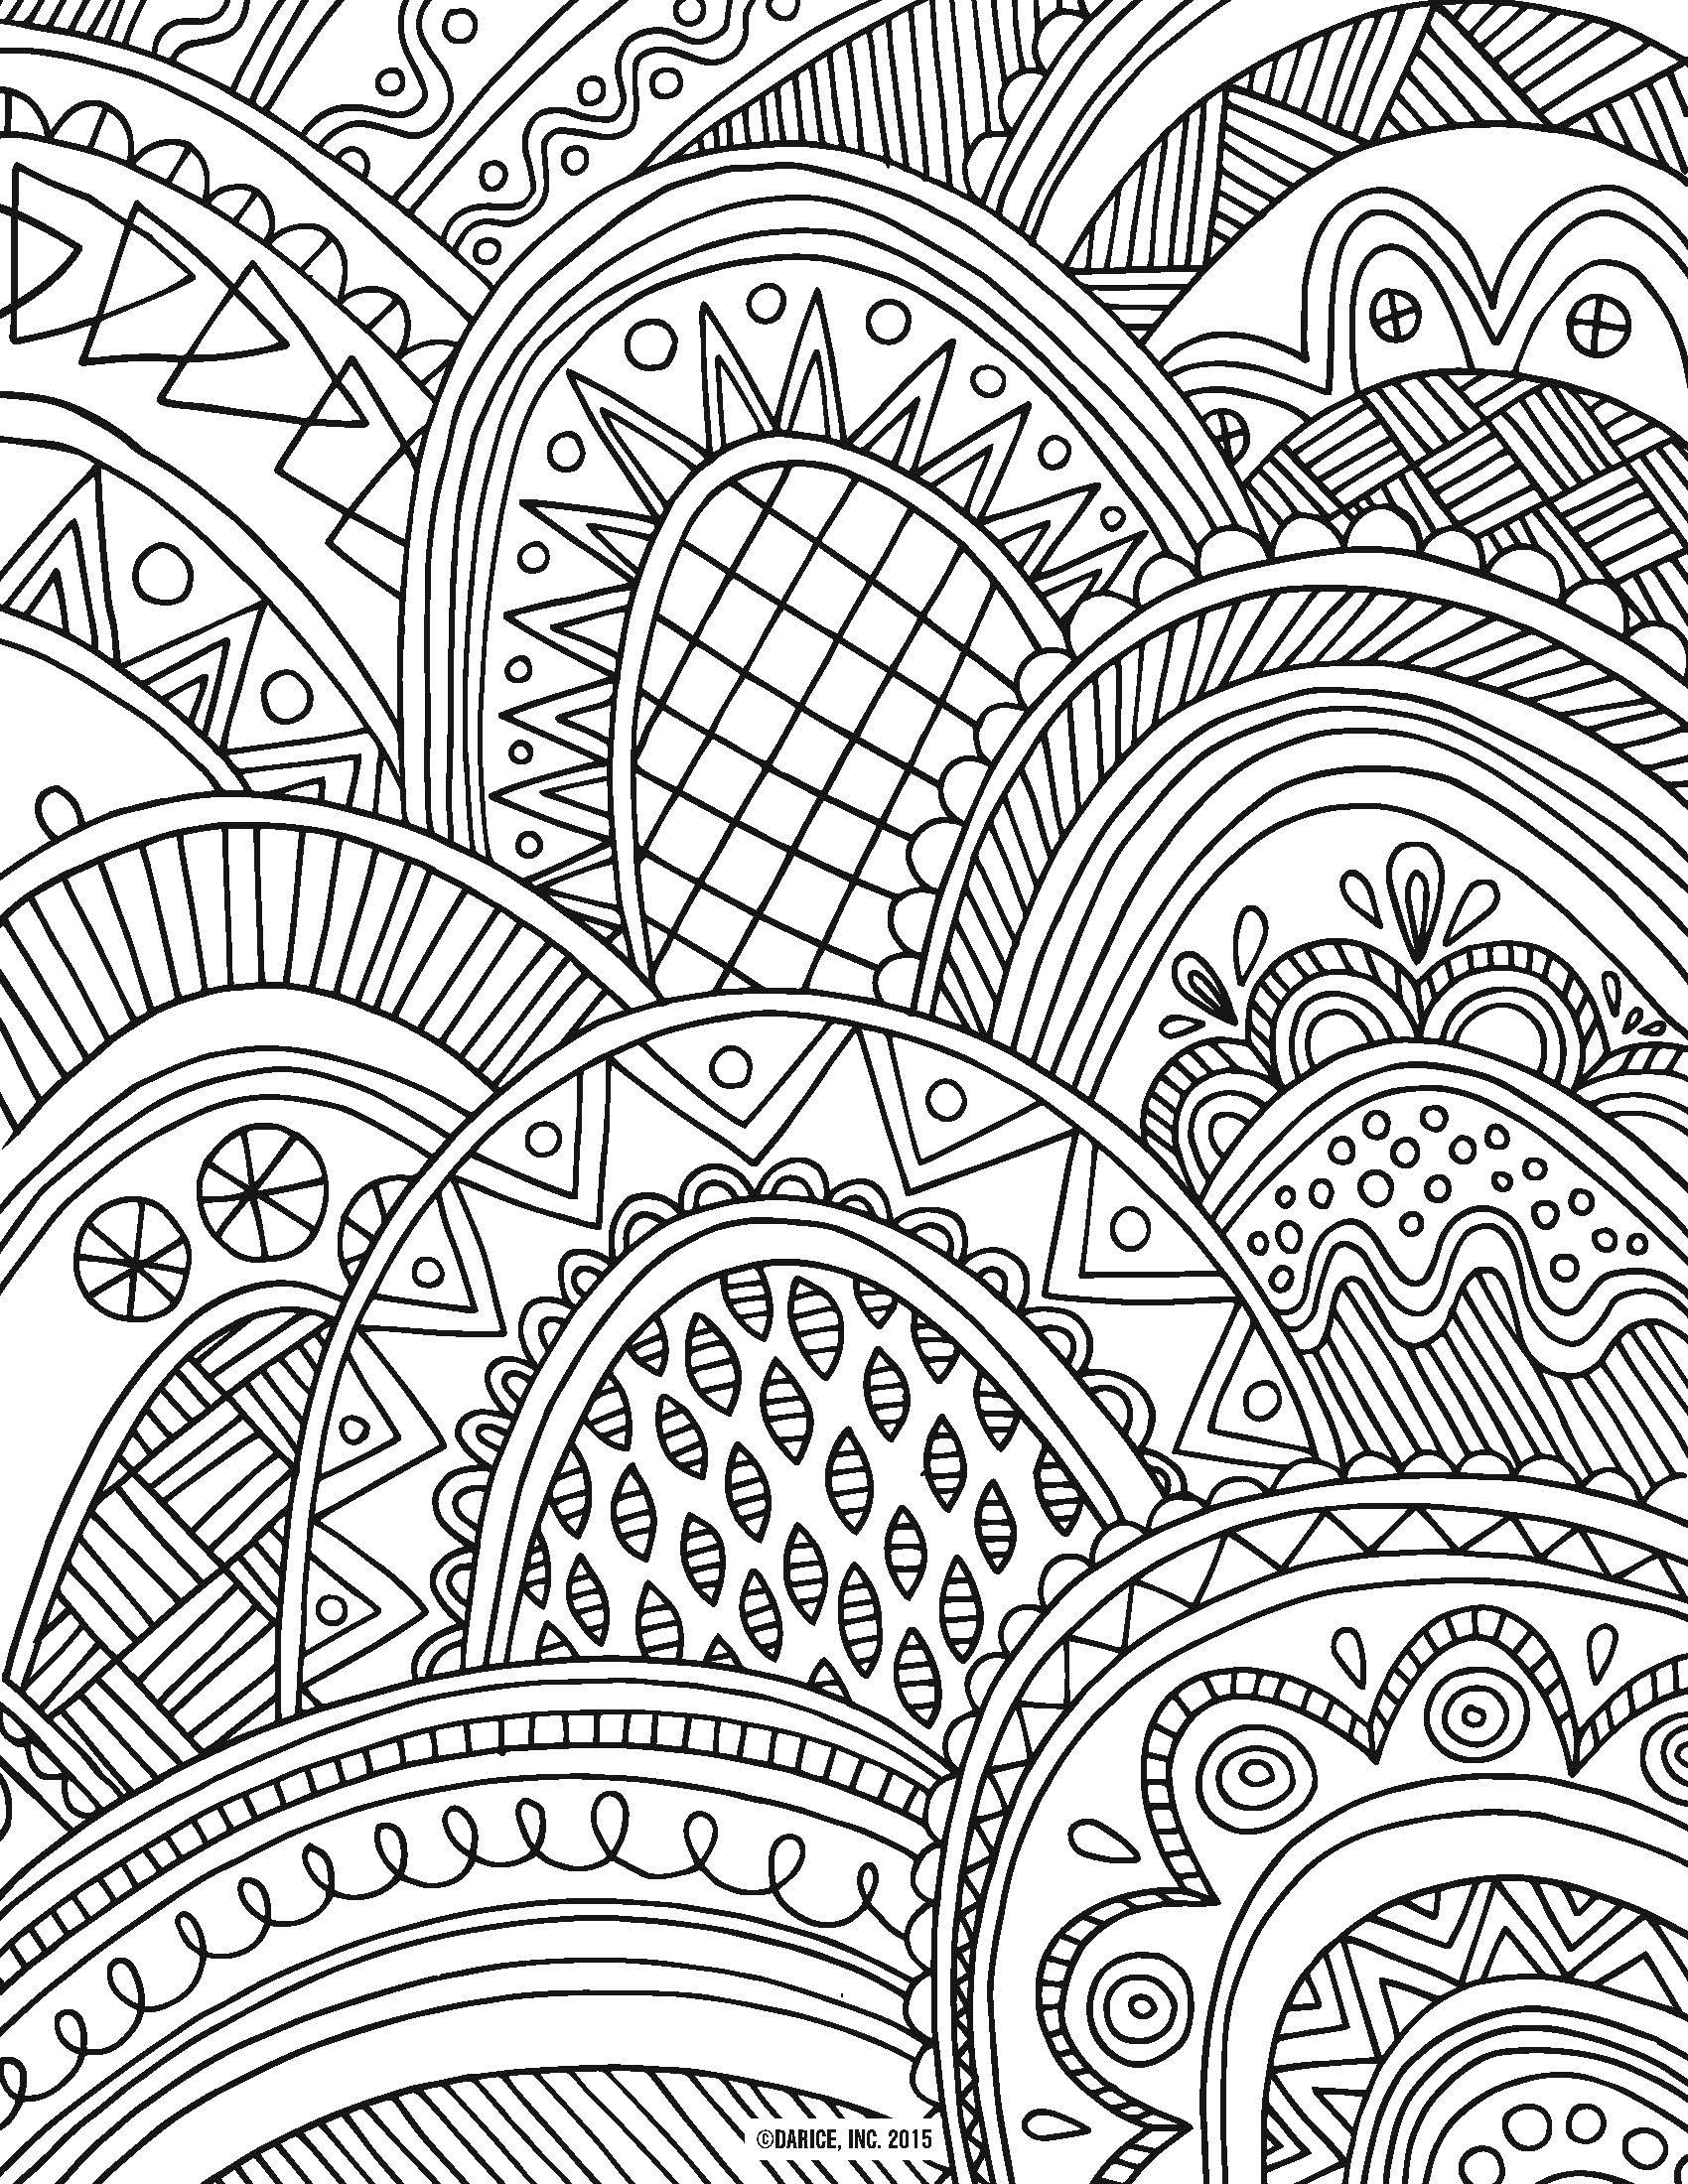 Adult Coloring Book Images
 20 Attractive Coloring Pages For Adults We Need Fun